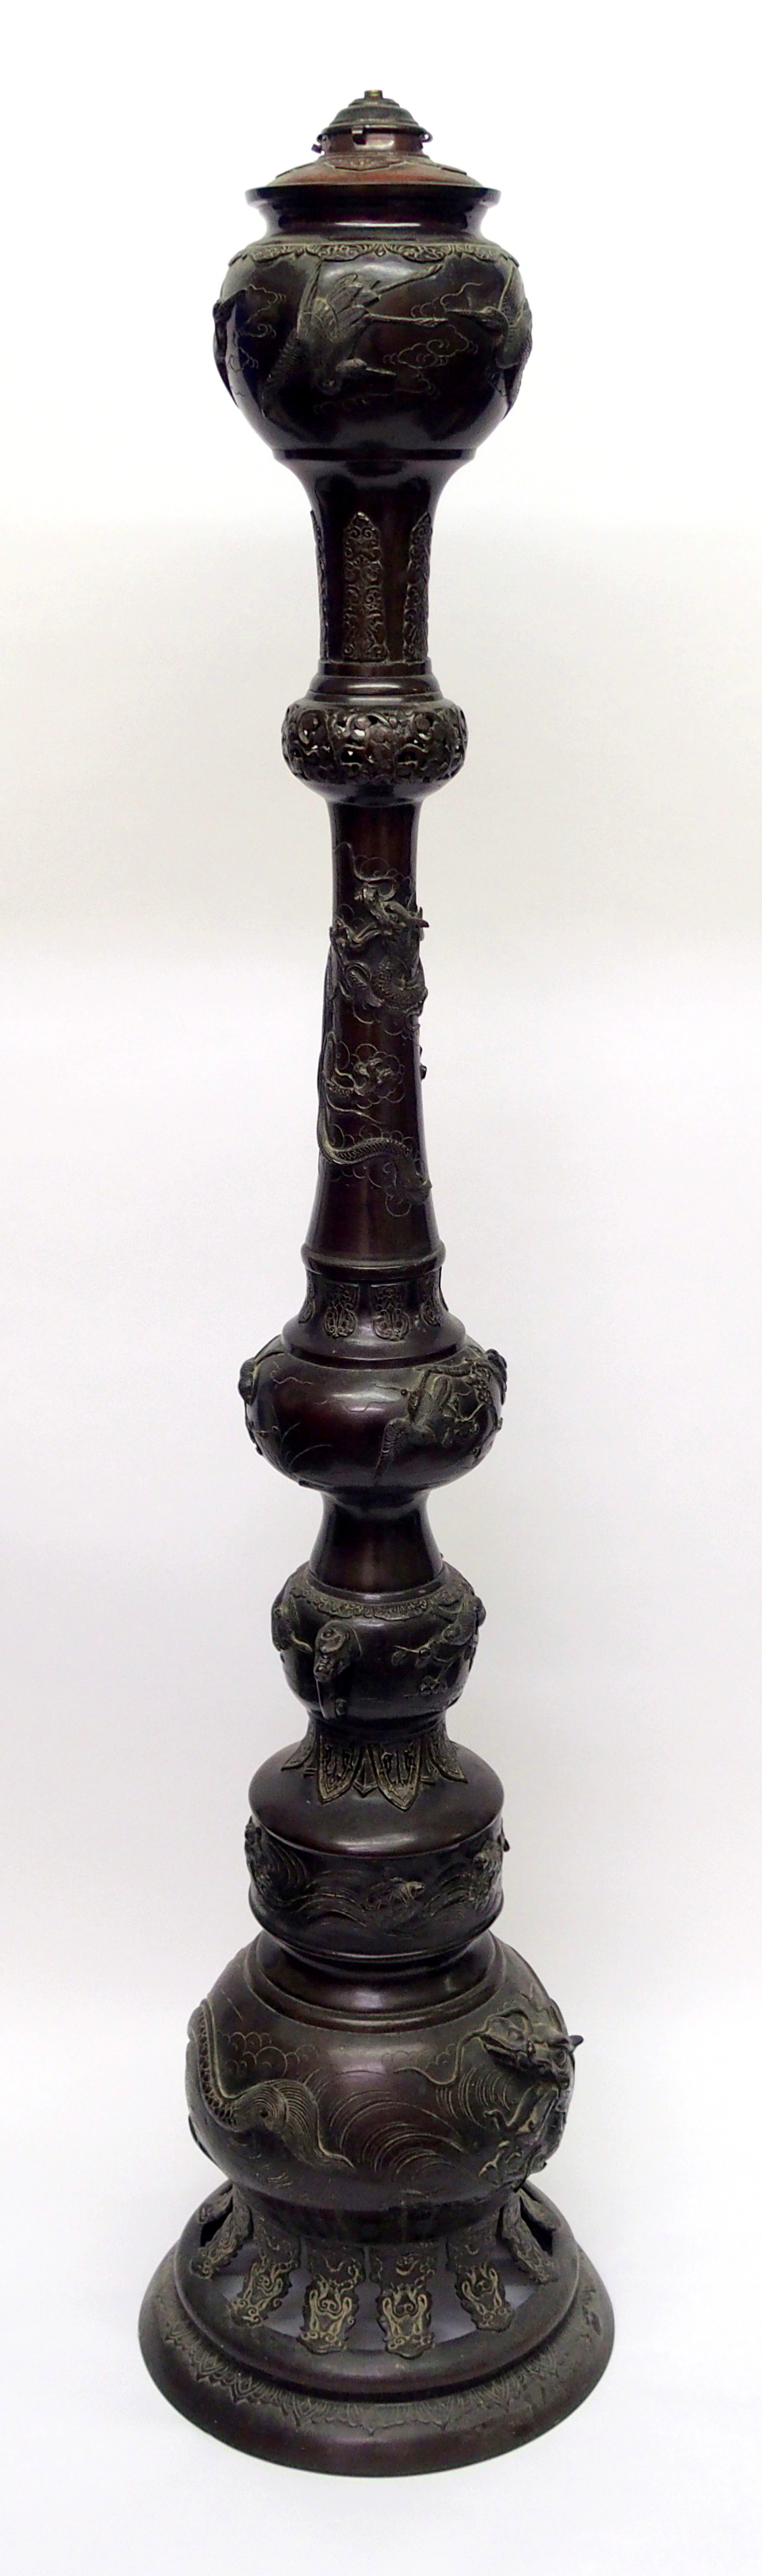 A large Japanese bronze oil lamp cast in sections with cranes, dragons, turtles, lappets, clouds and